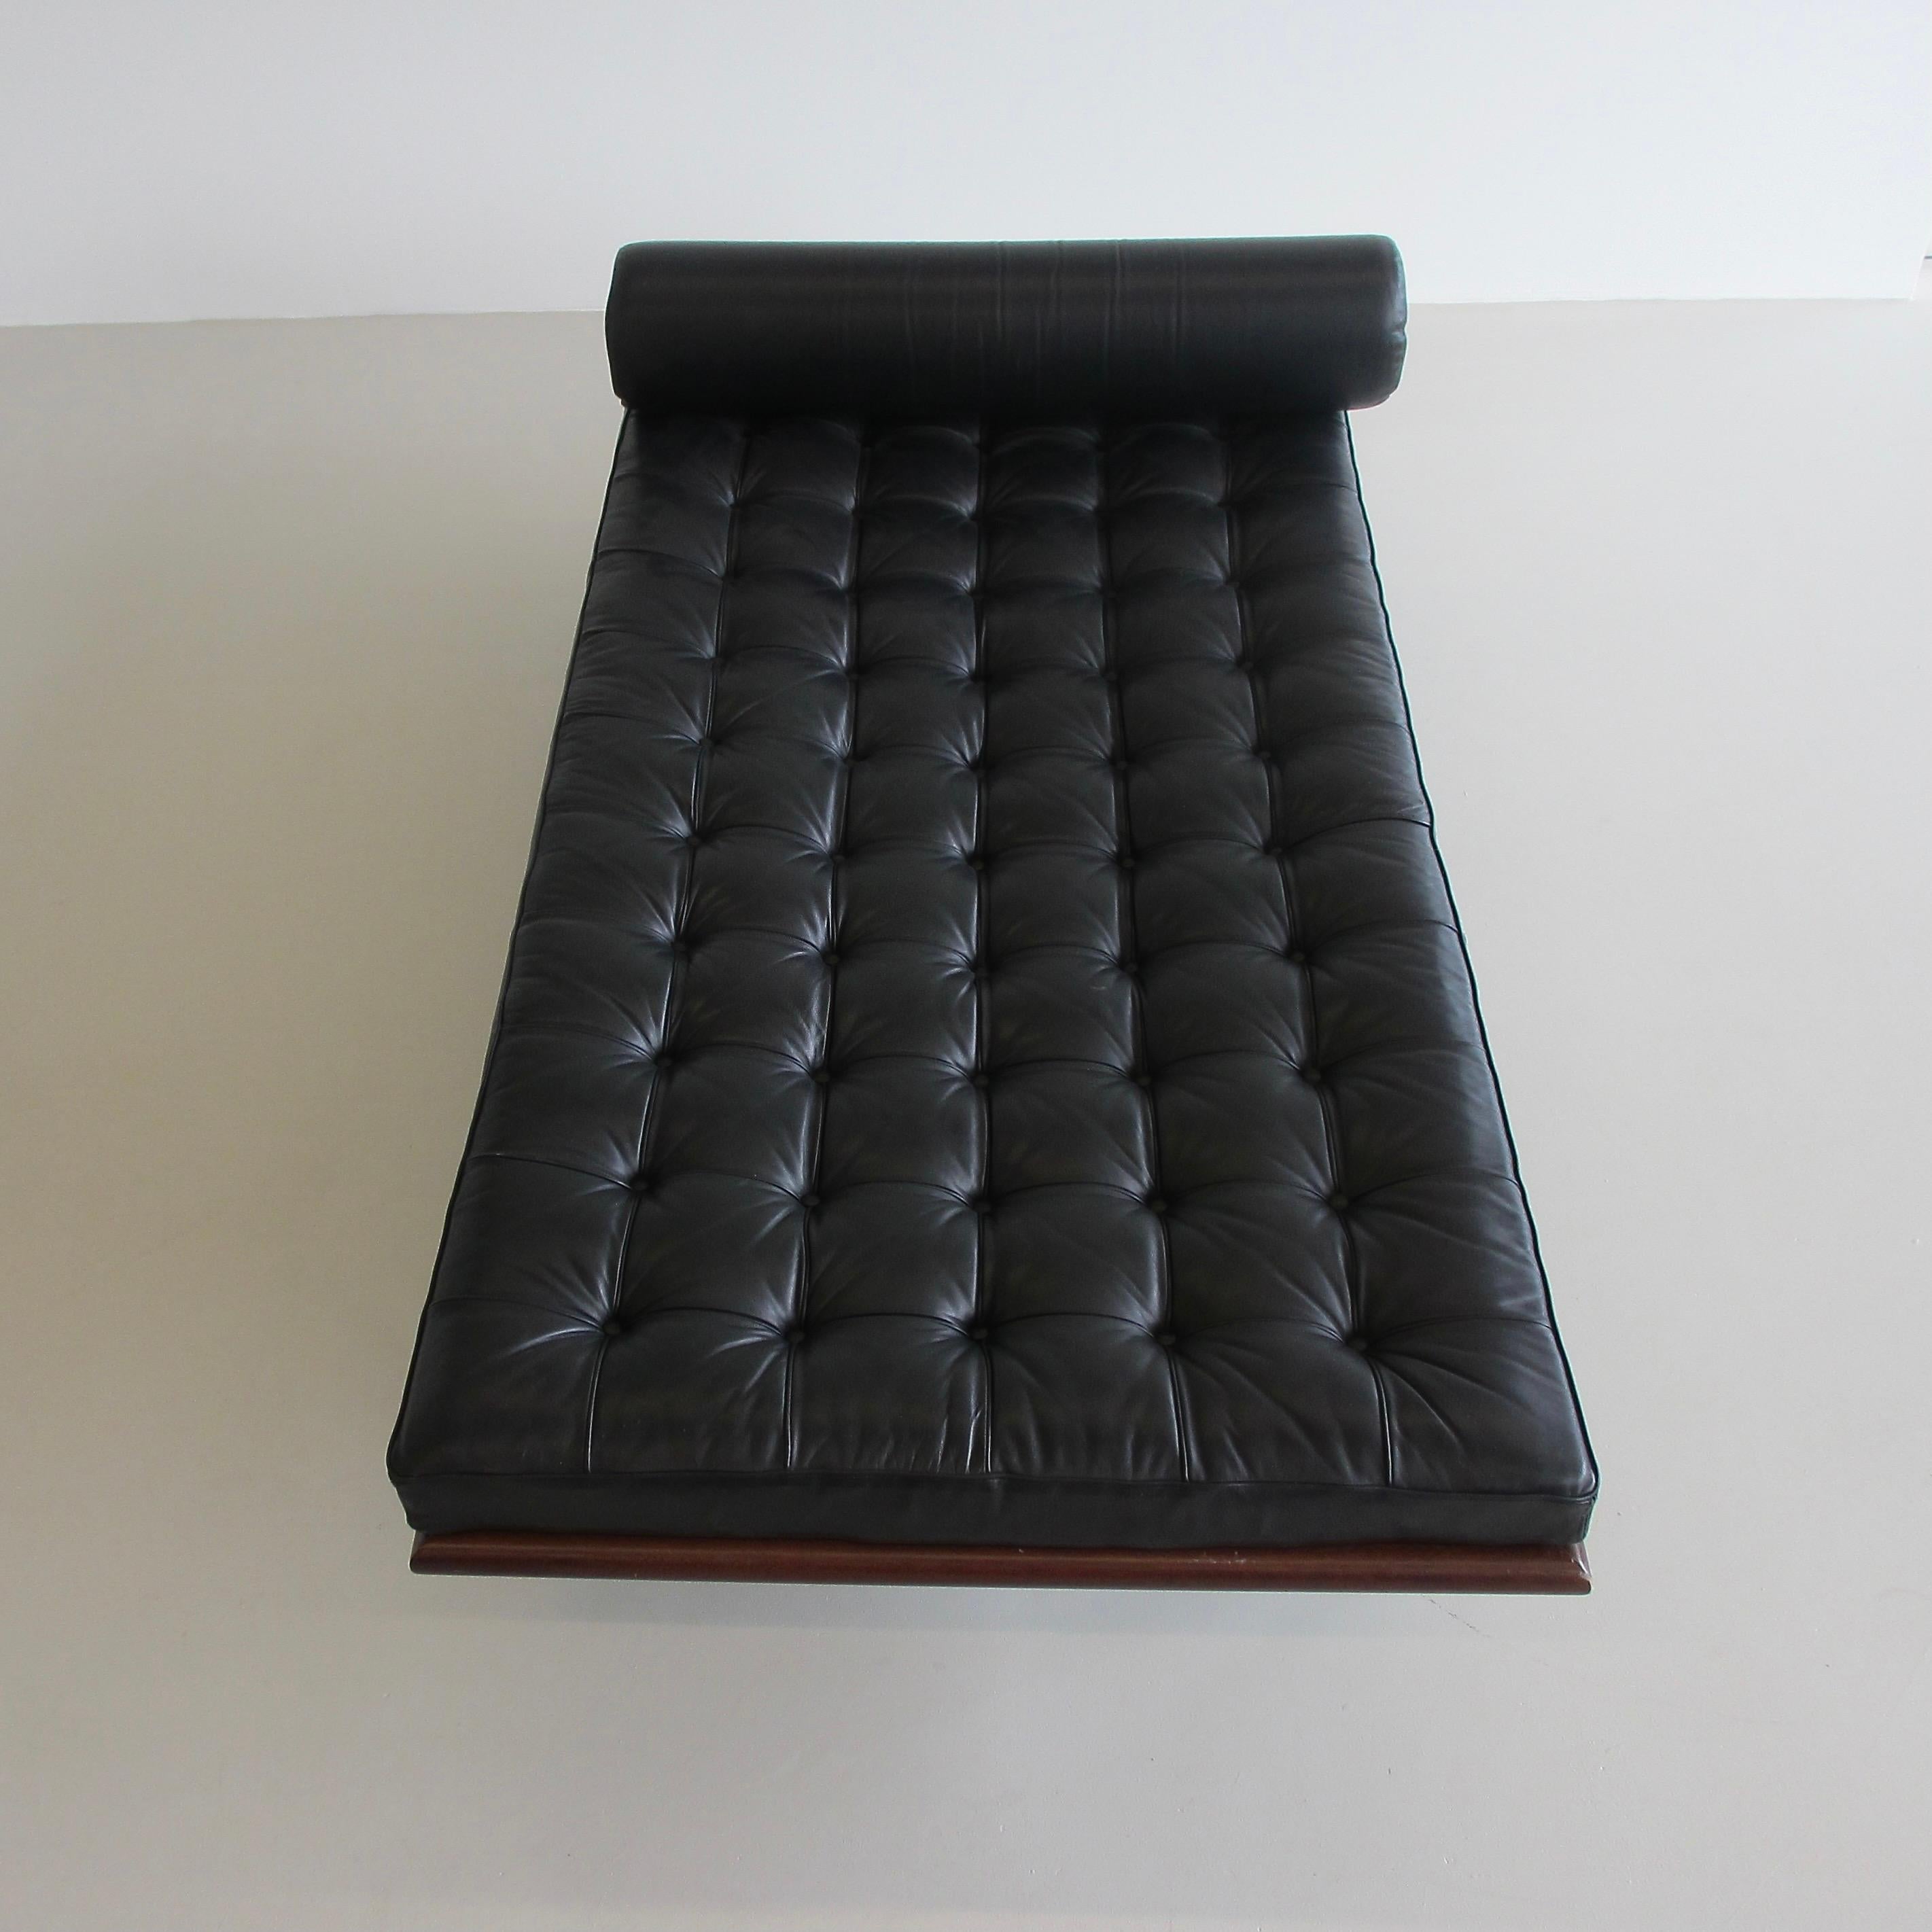 Modern Barcelona Day Bed, Designed by Mies van der Rohe